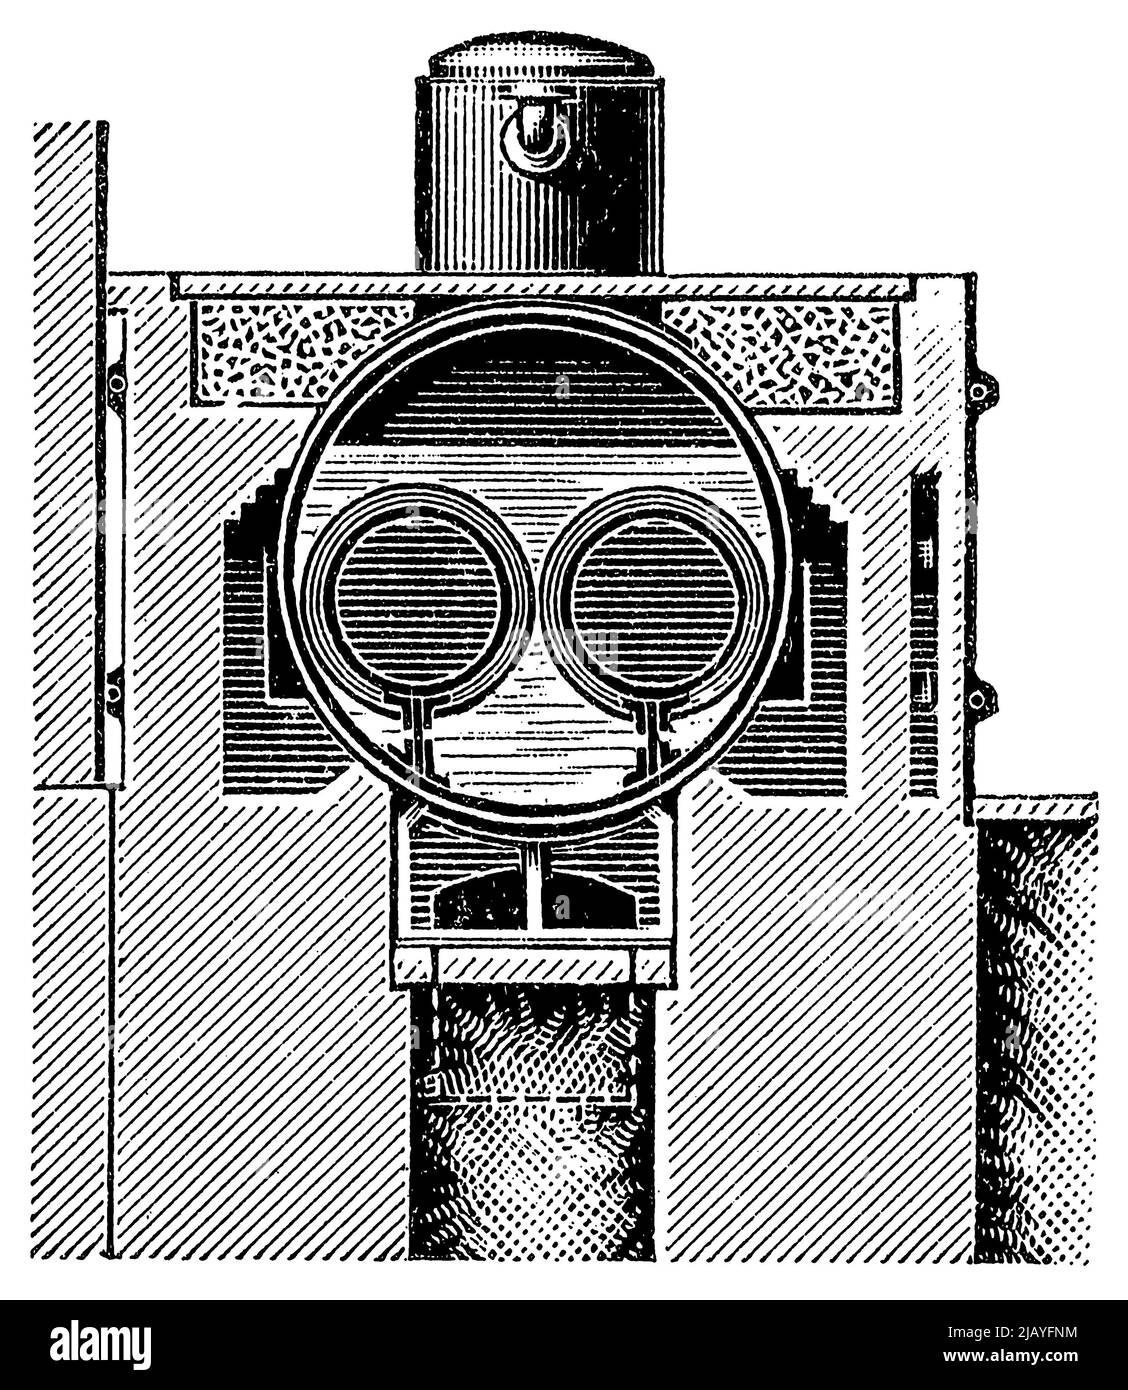 Two-flue boiler, sectional view. Publication of the book 'Meyers Konversations-Lexikon', Volume 2, Leipzig, Germany, 1910 Stock Photo